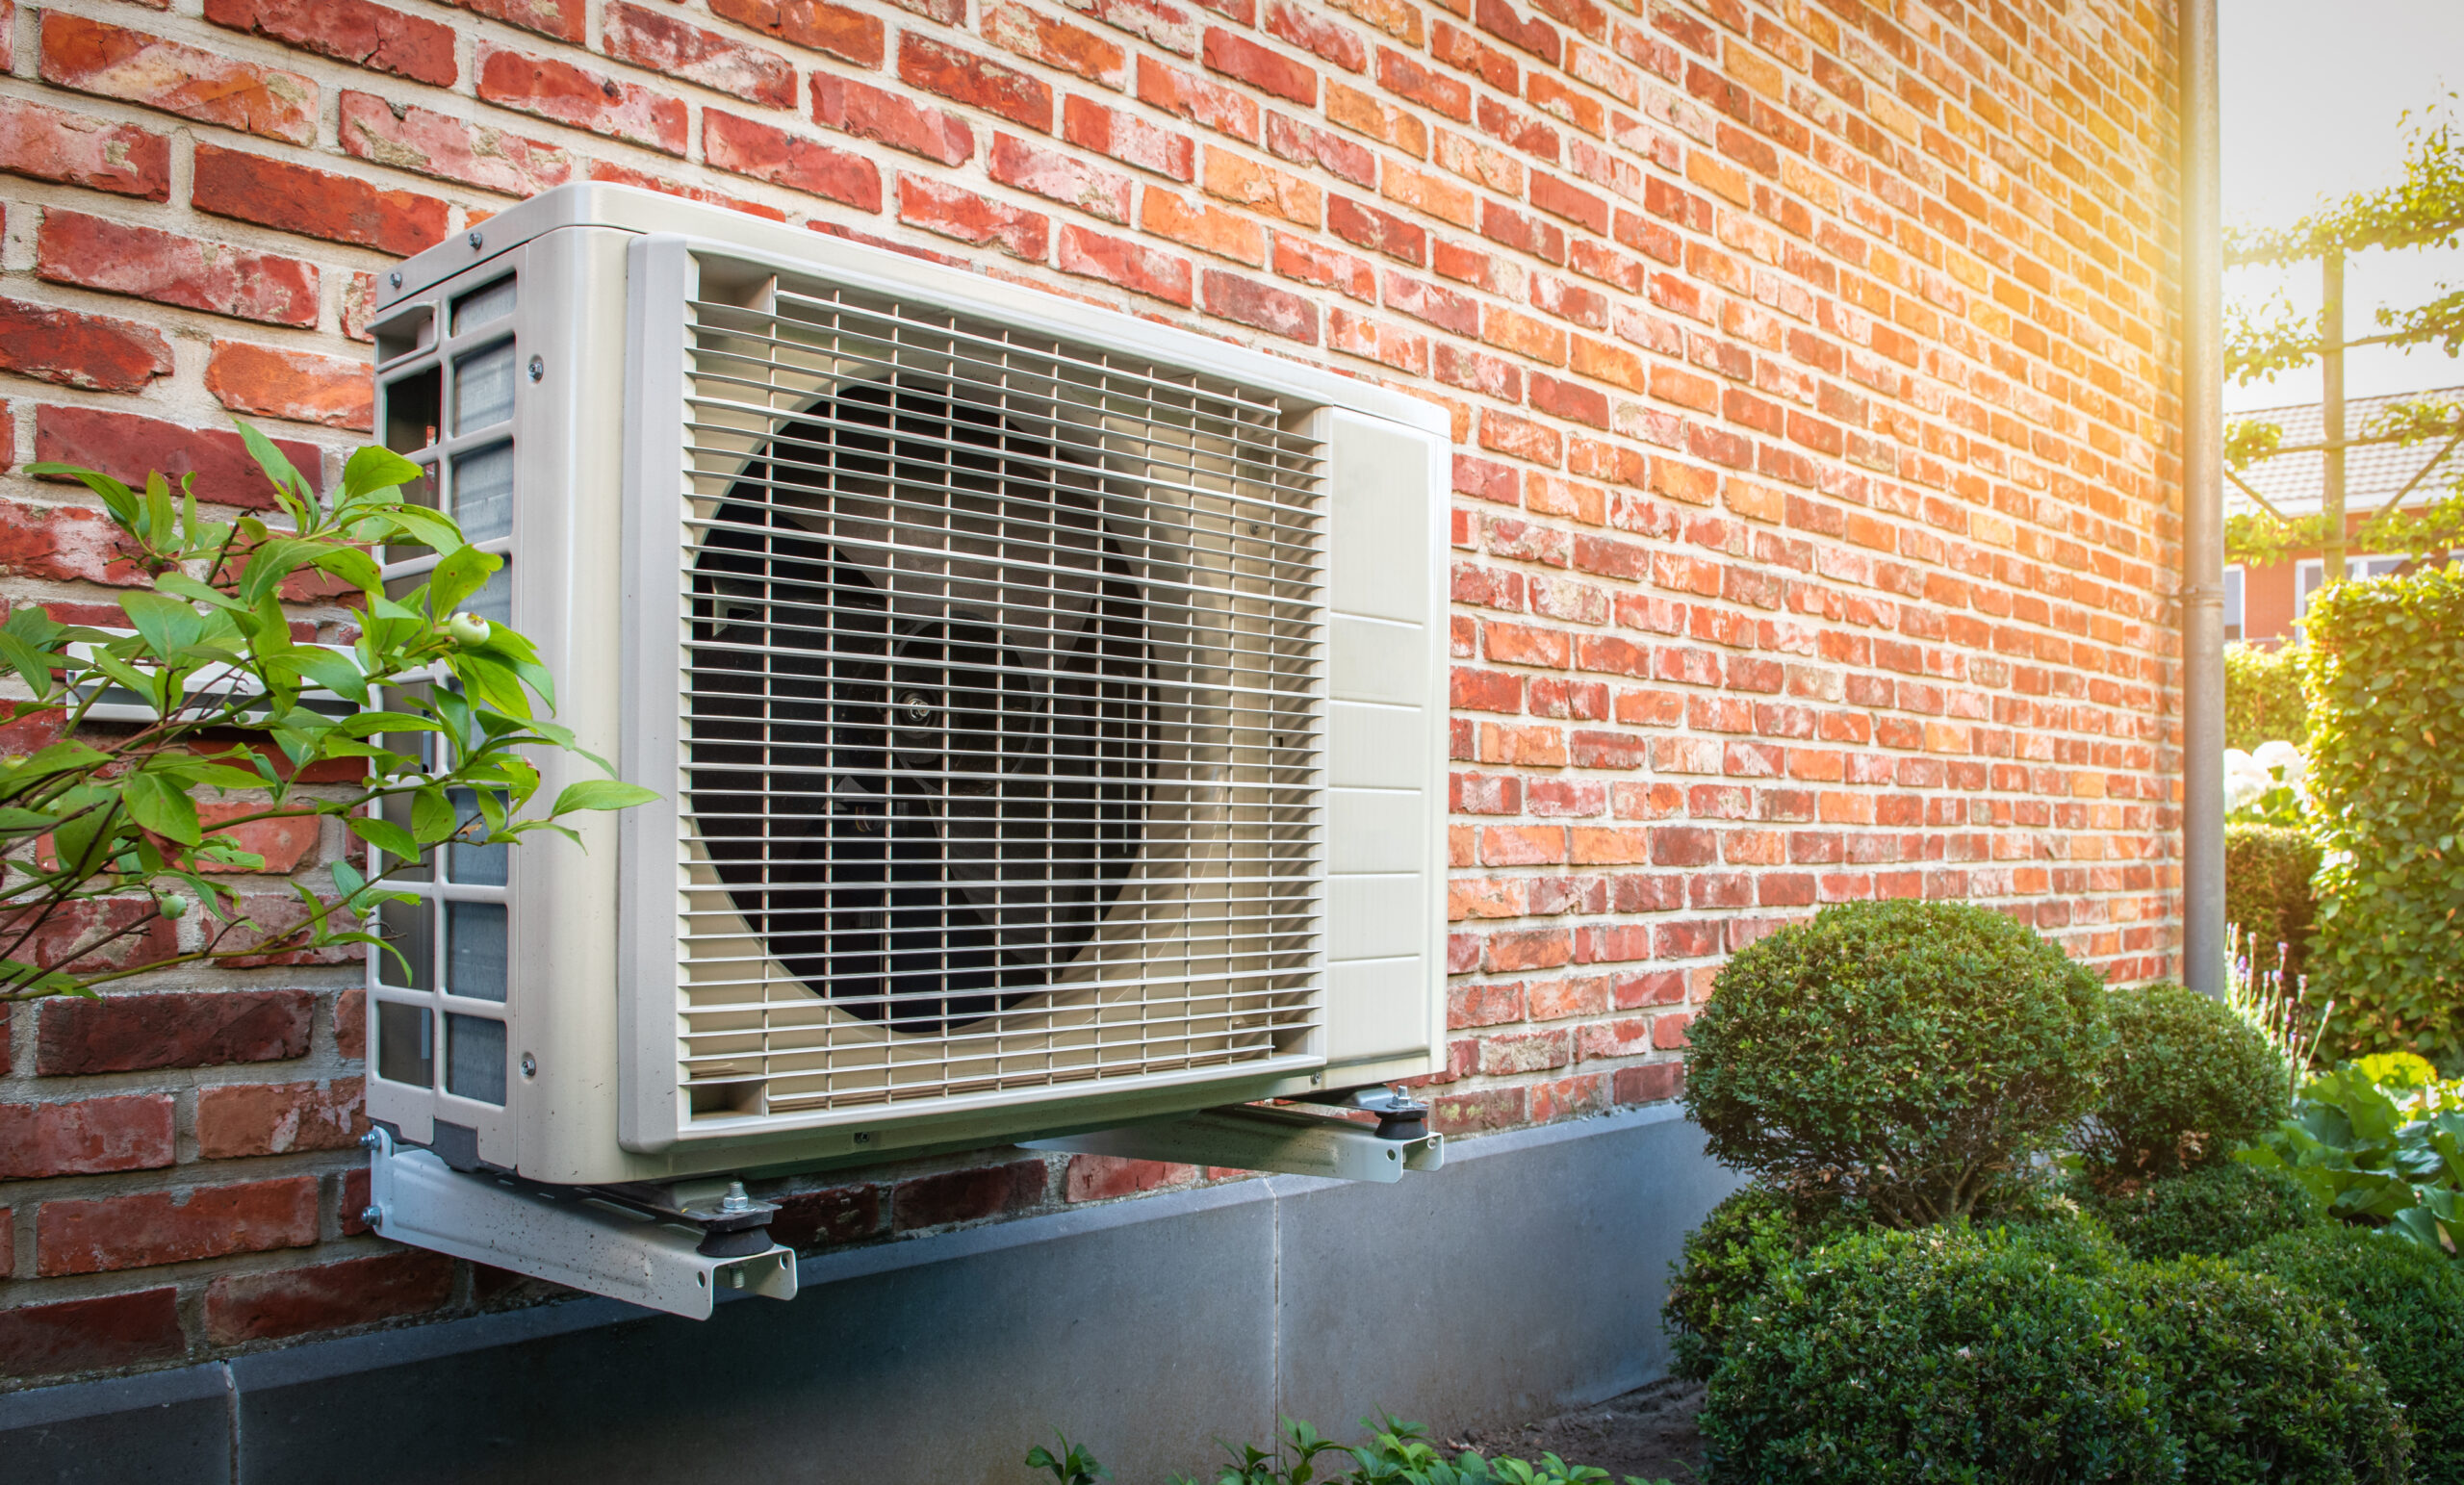 Heat pump mounted on a brick wall of a residence